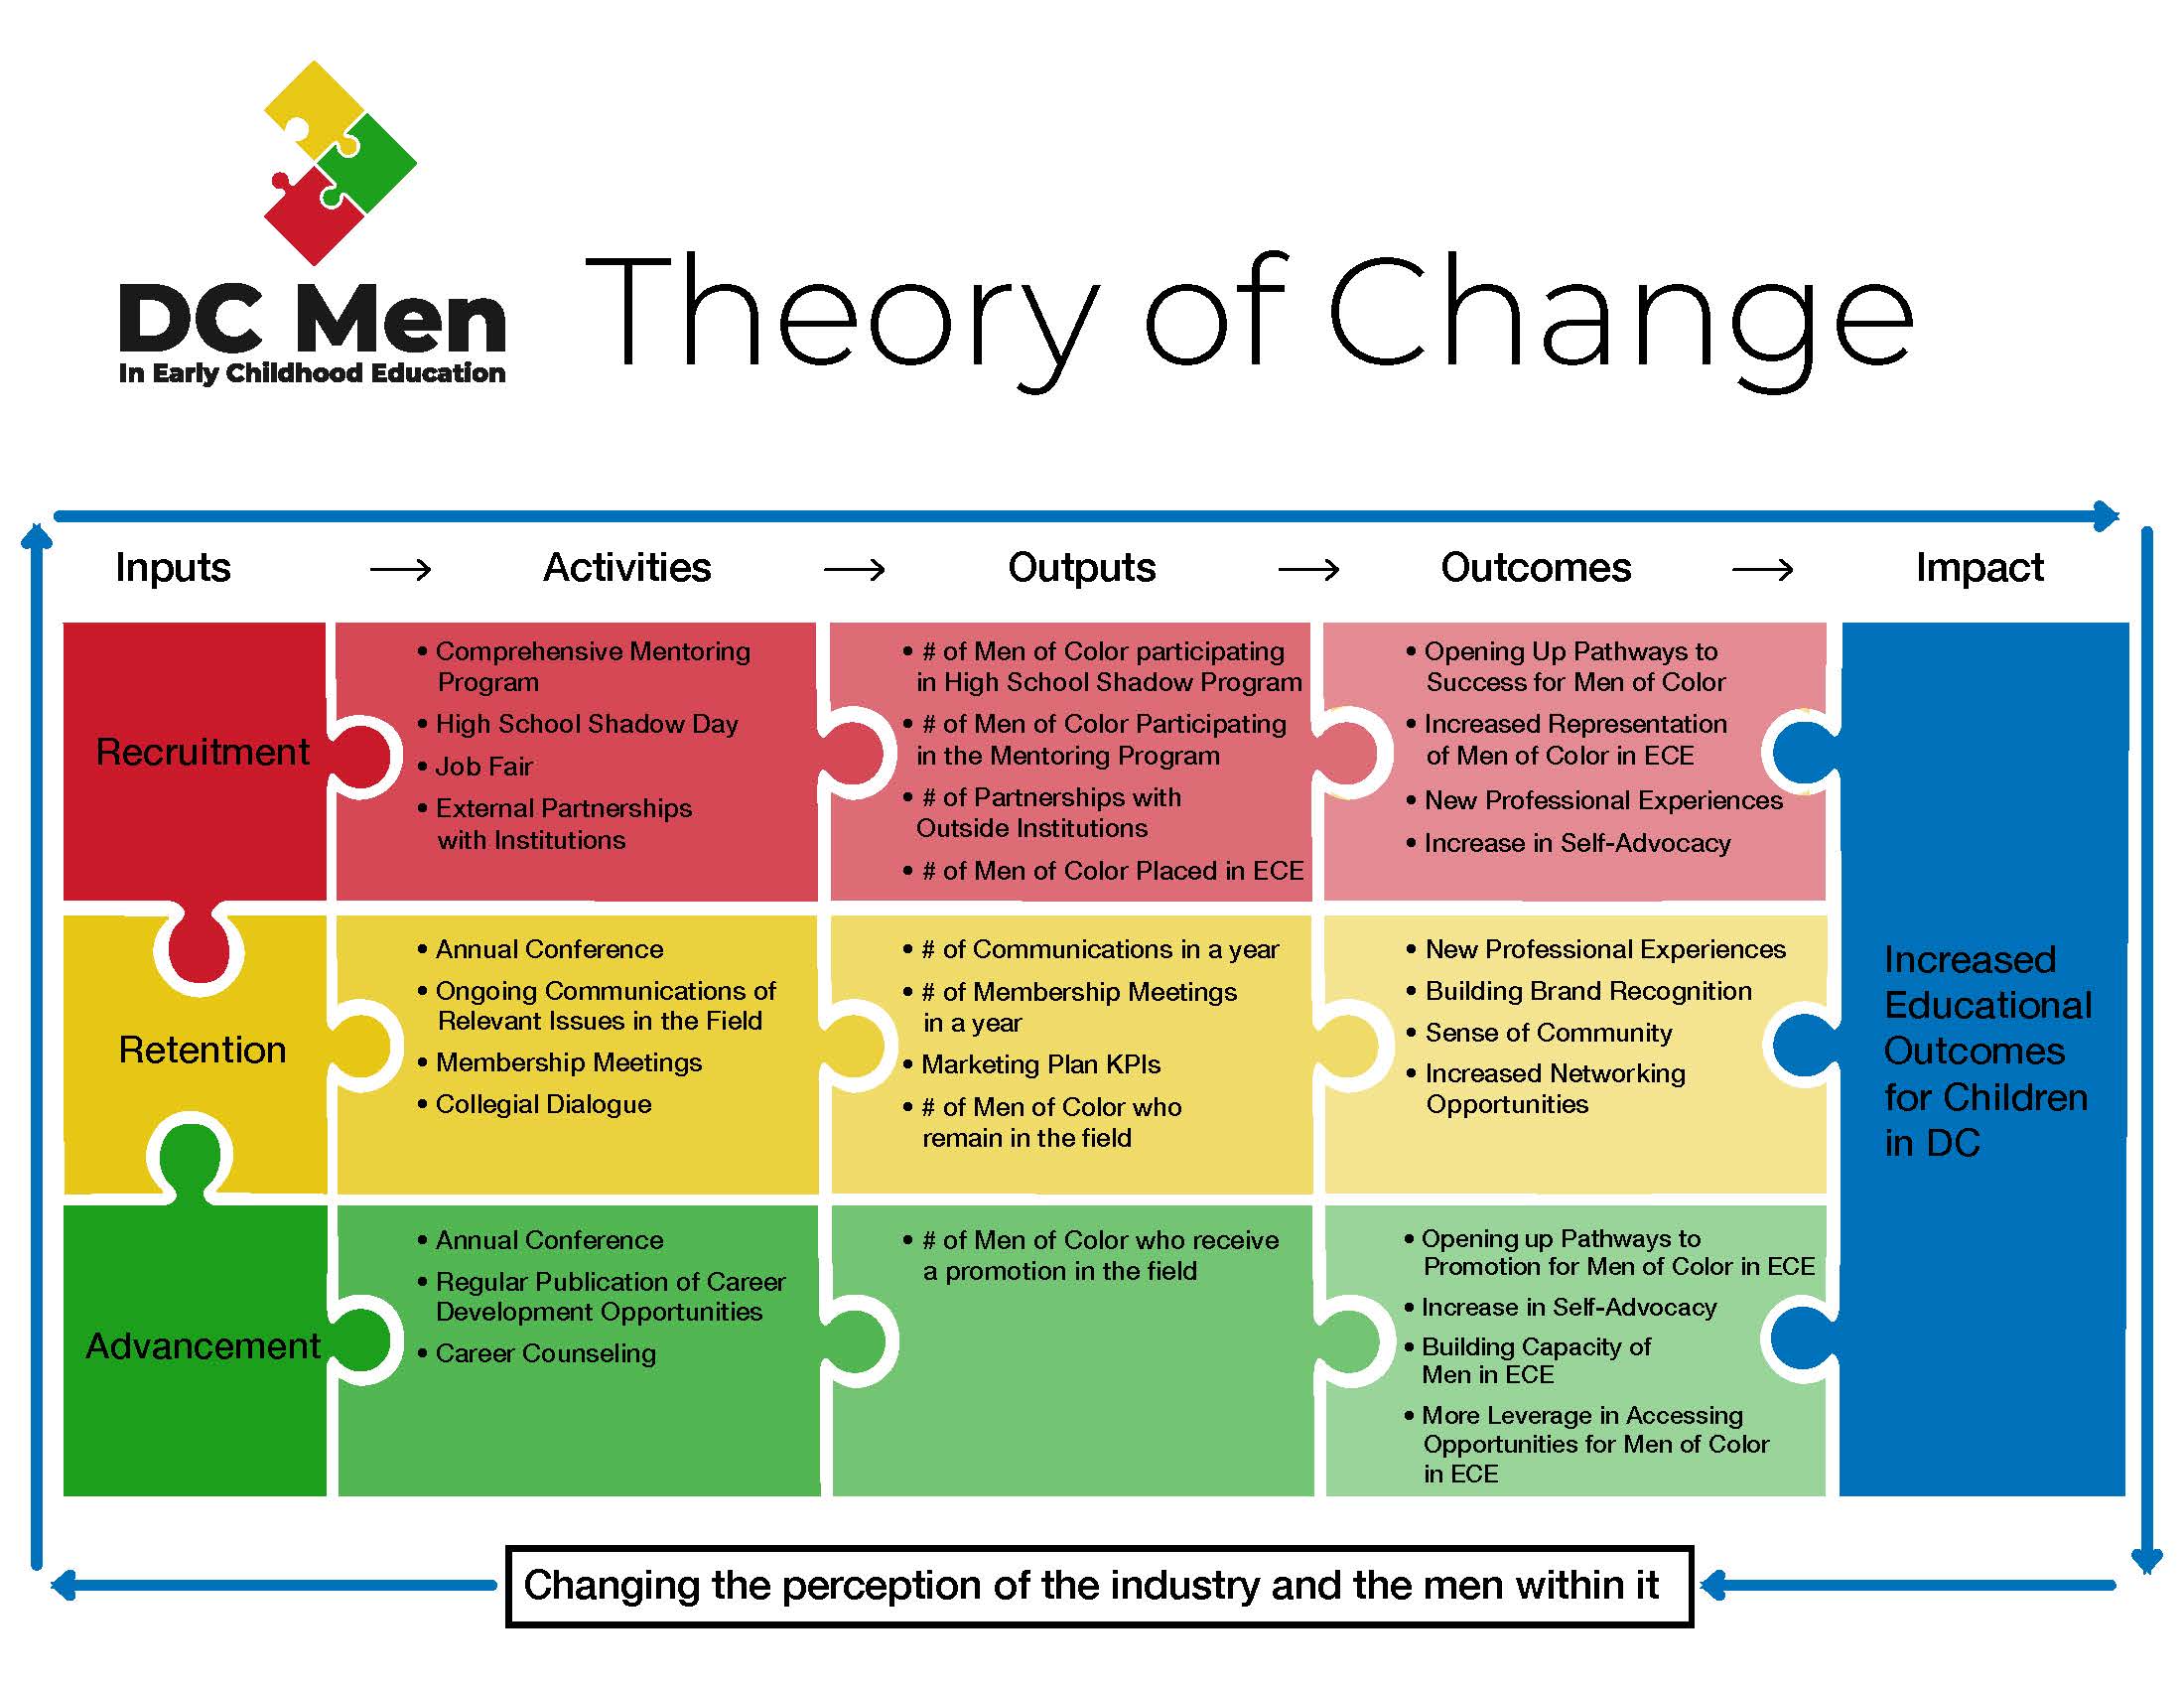 dc men theory of change graphic